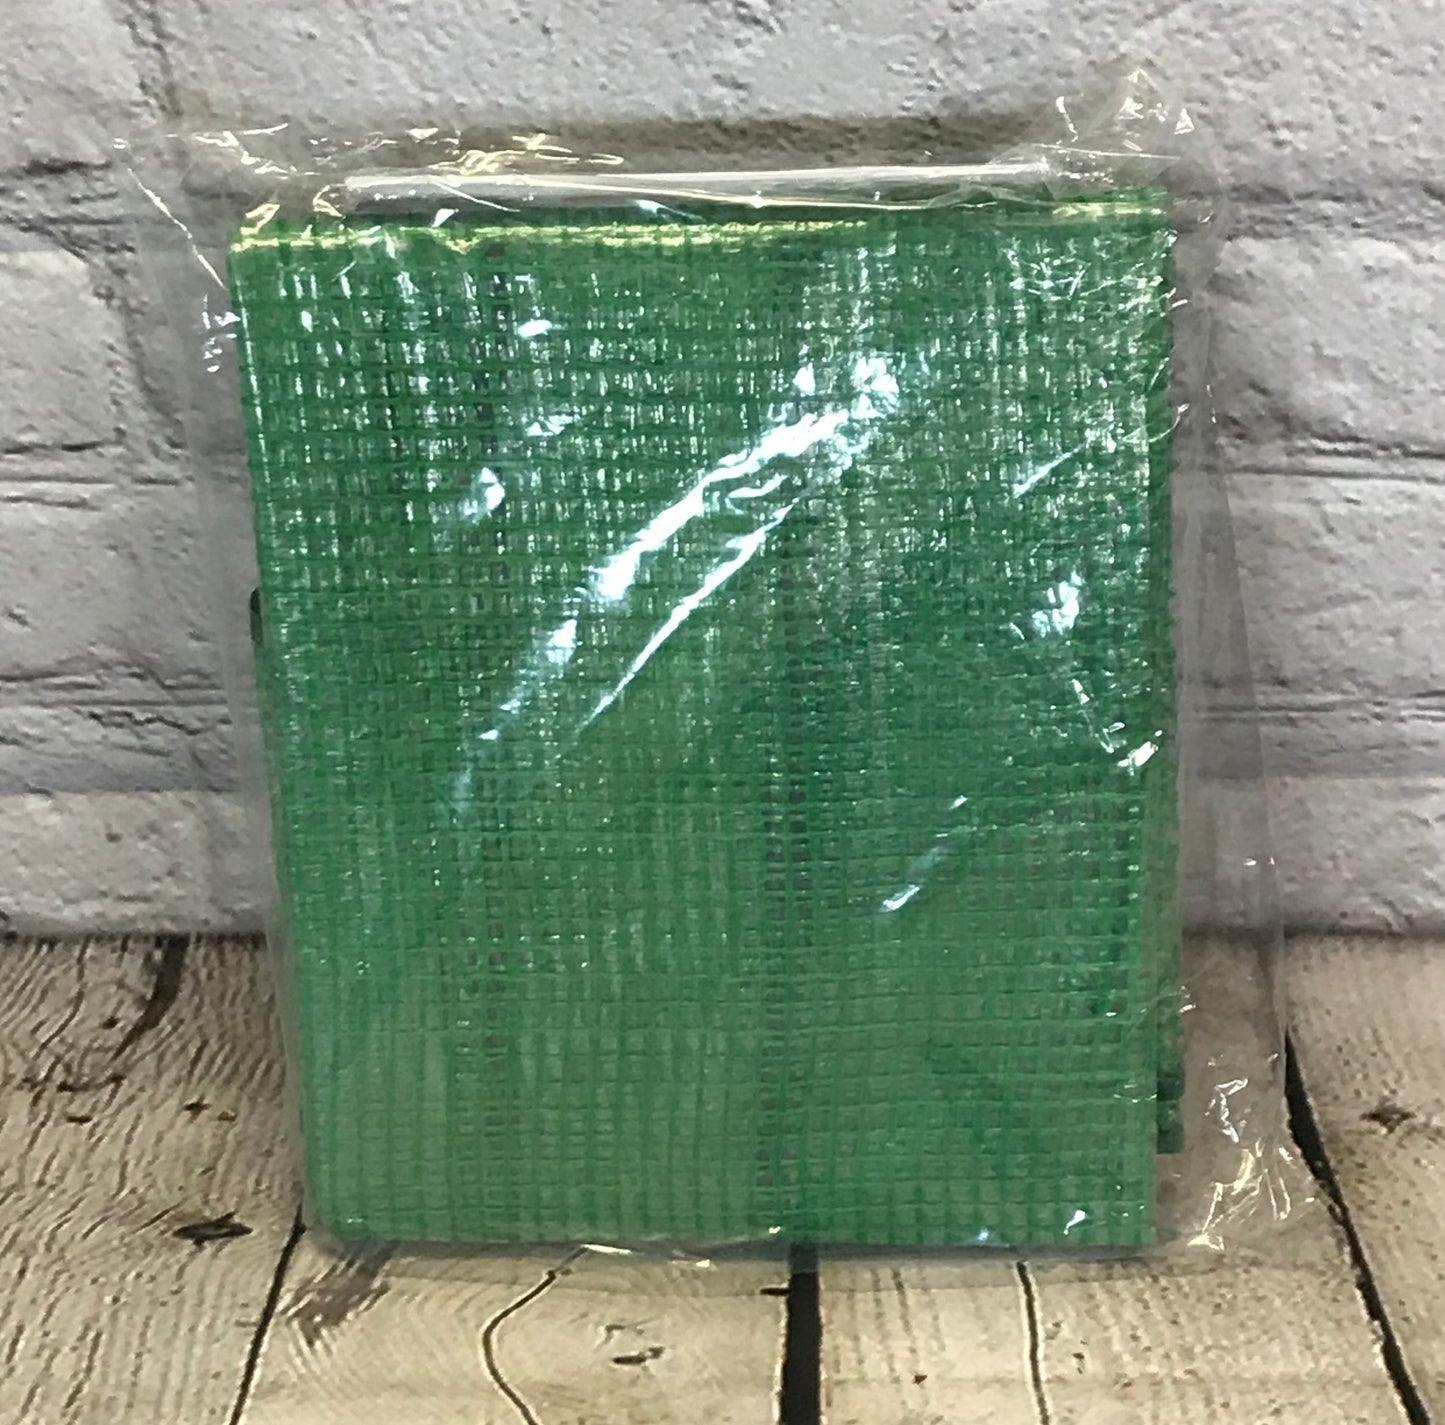 4 Tier Mini Greenhouse Re-inforced Replacement Cover